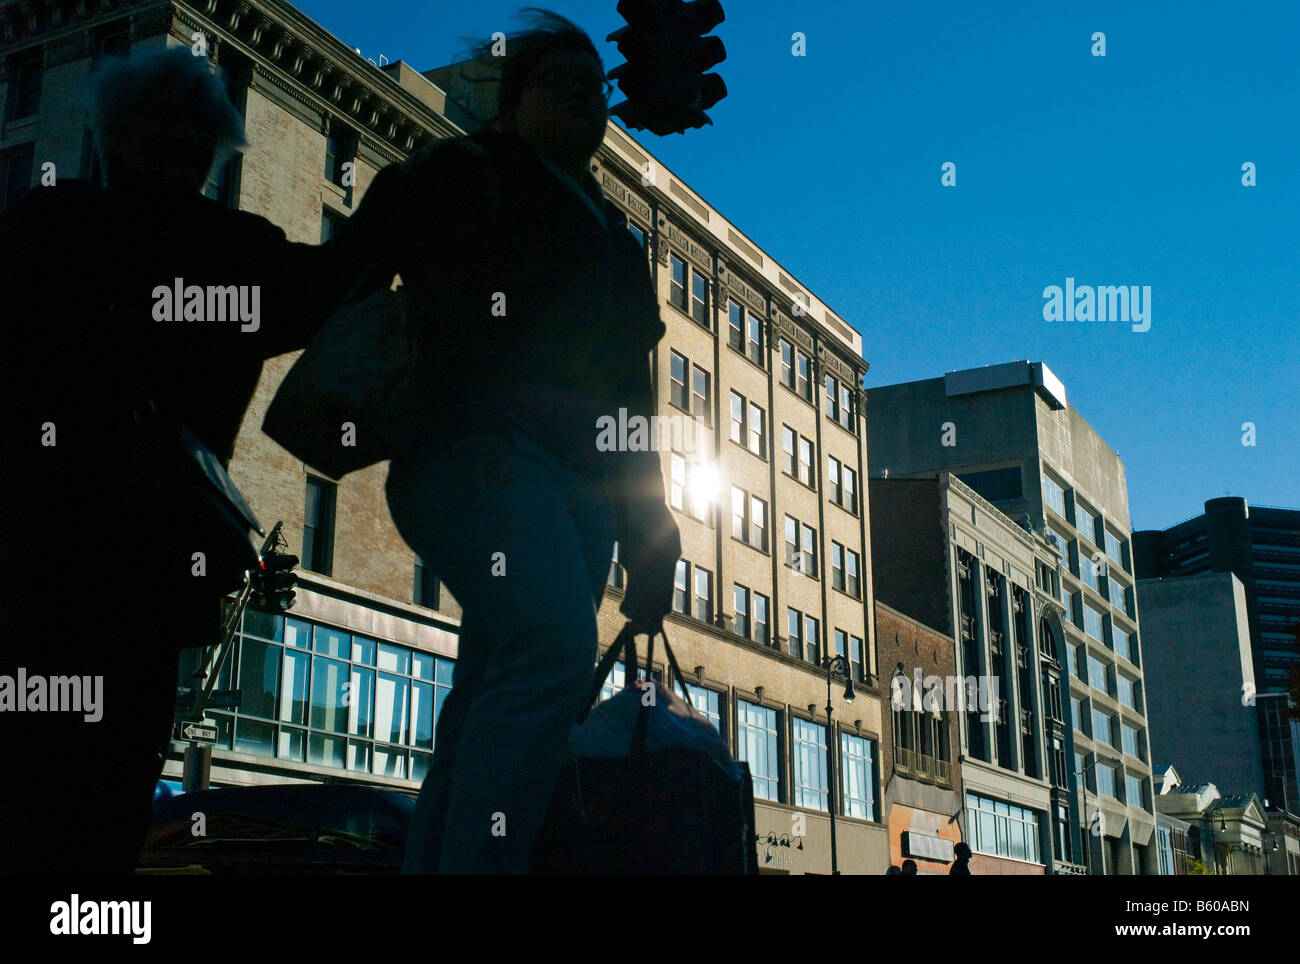 Two women shoppers with bags walk through a city with office buildings in rear in New Haven CT a modern city Stock Photo